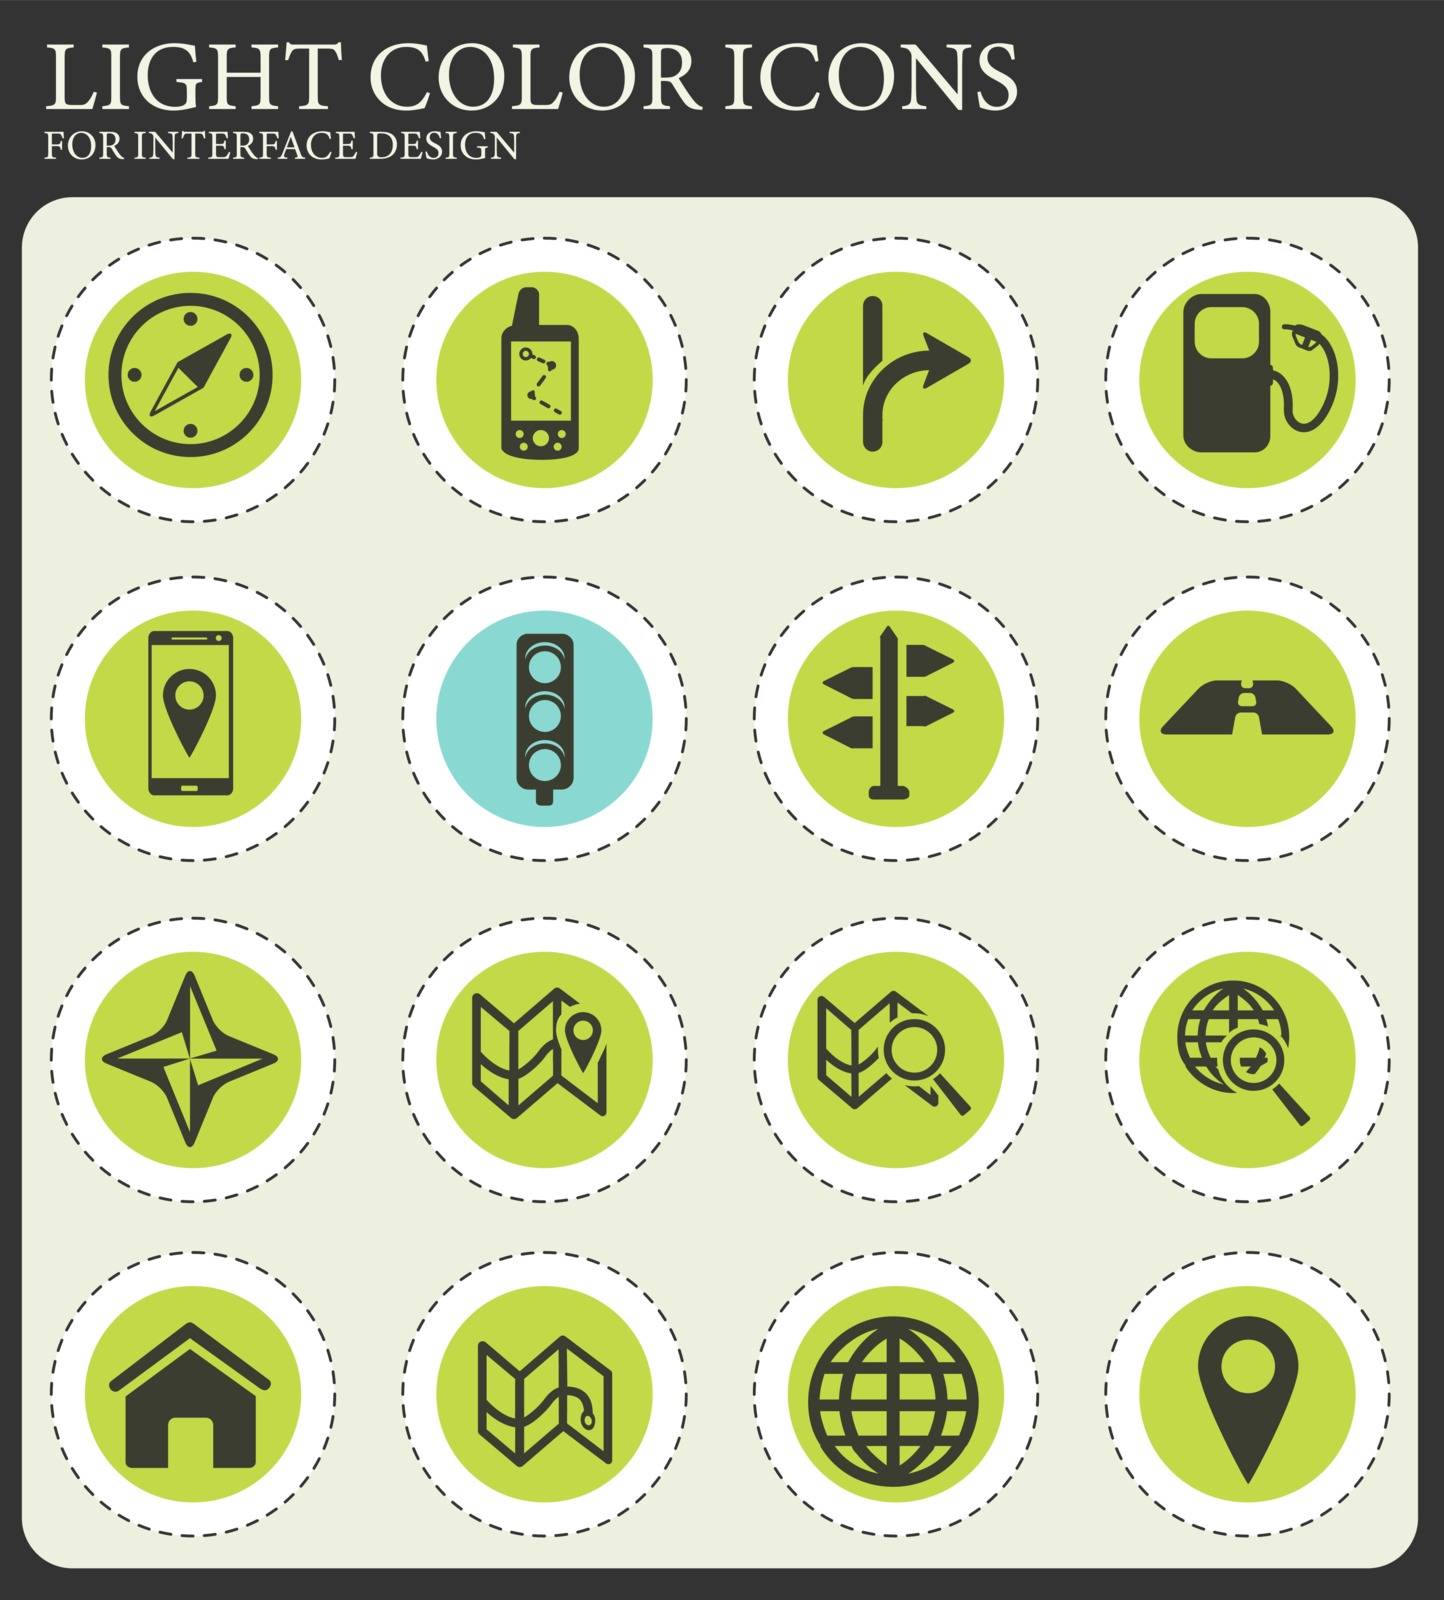 Navigation simply icons by ayax